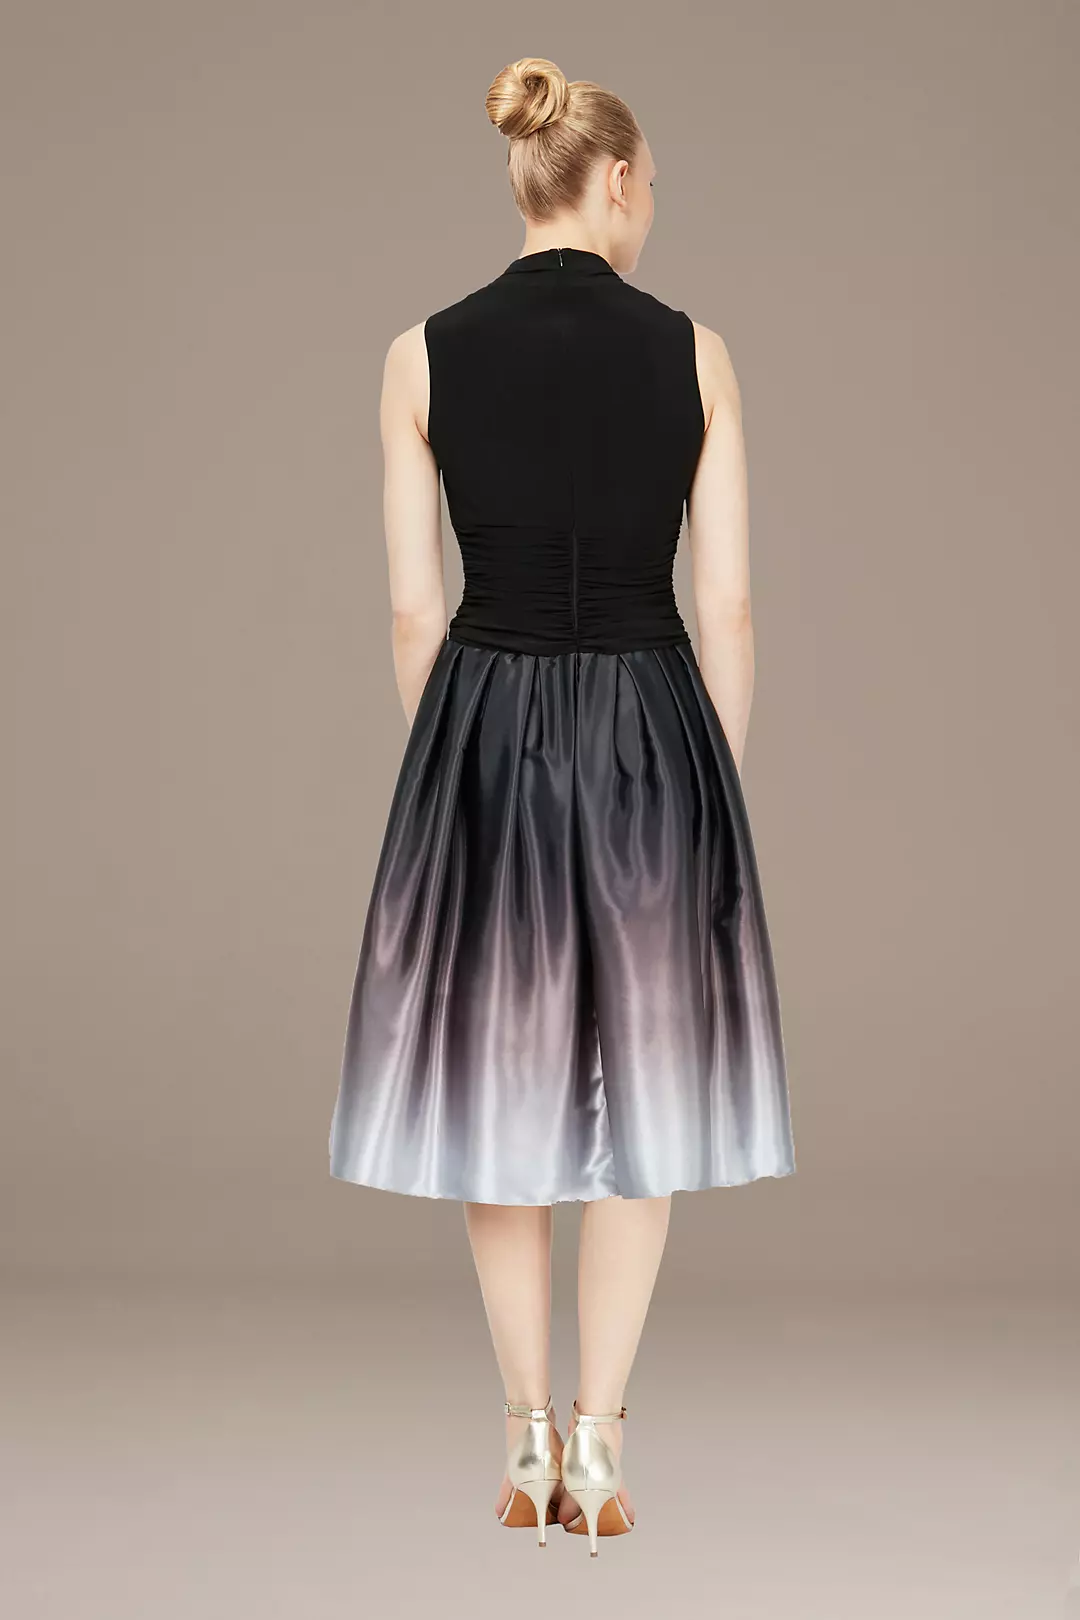 Satin Charmeuse Party Dress with Ruched Waist Image 2